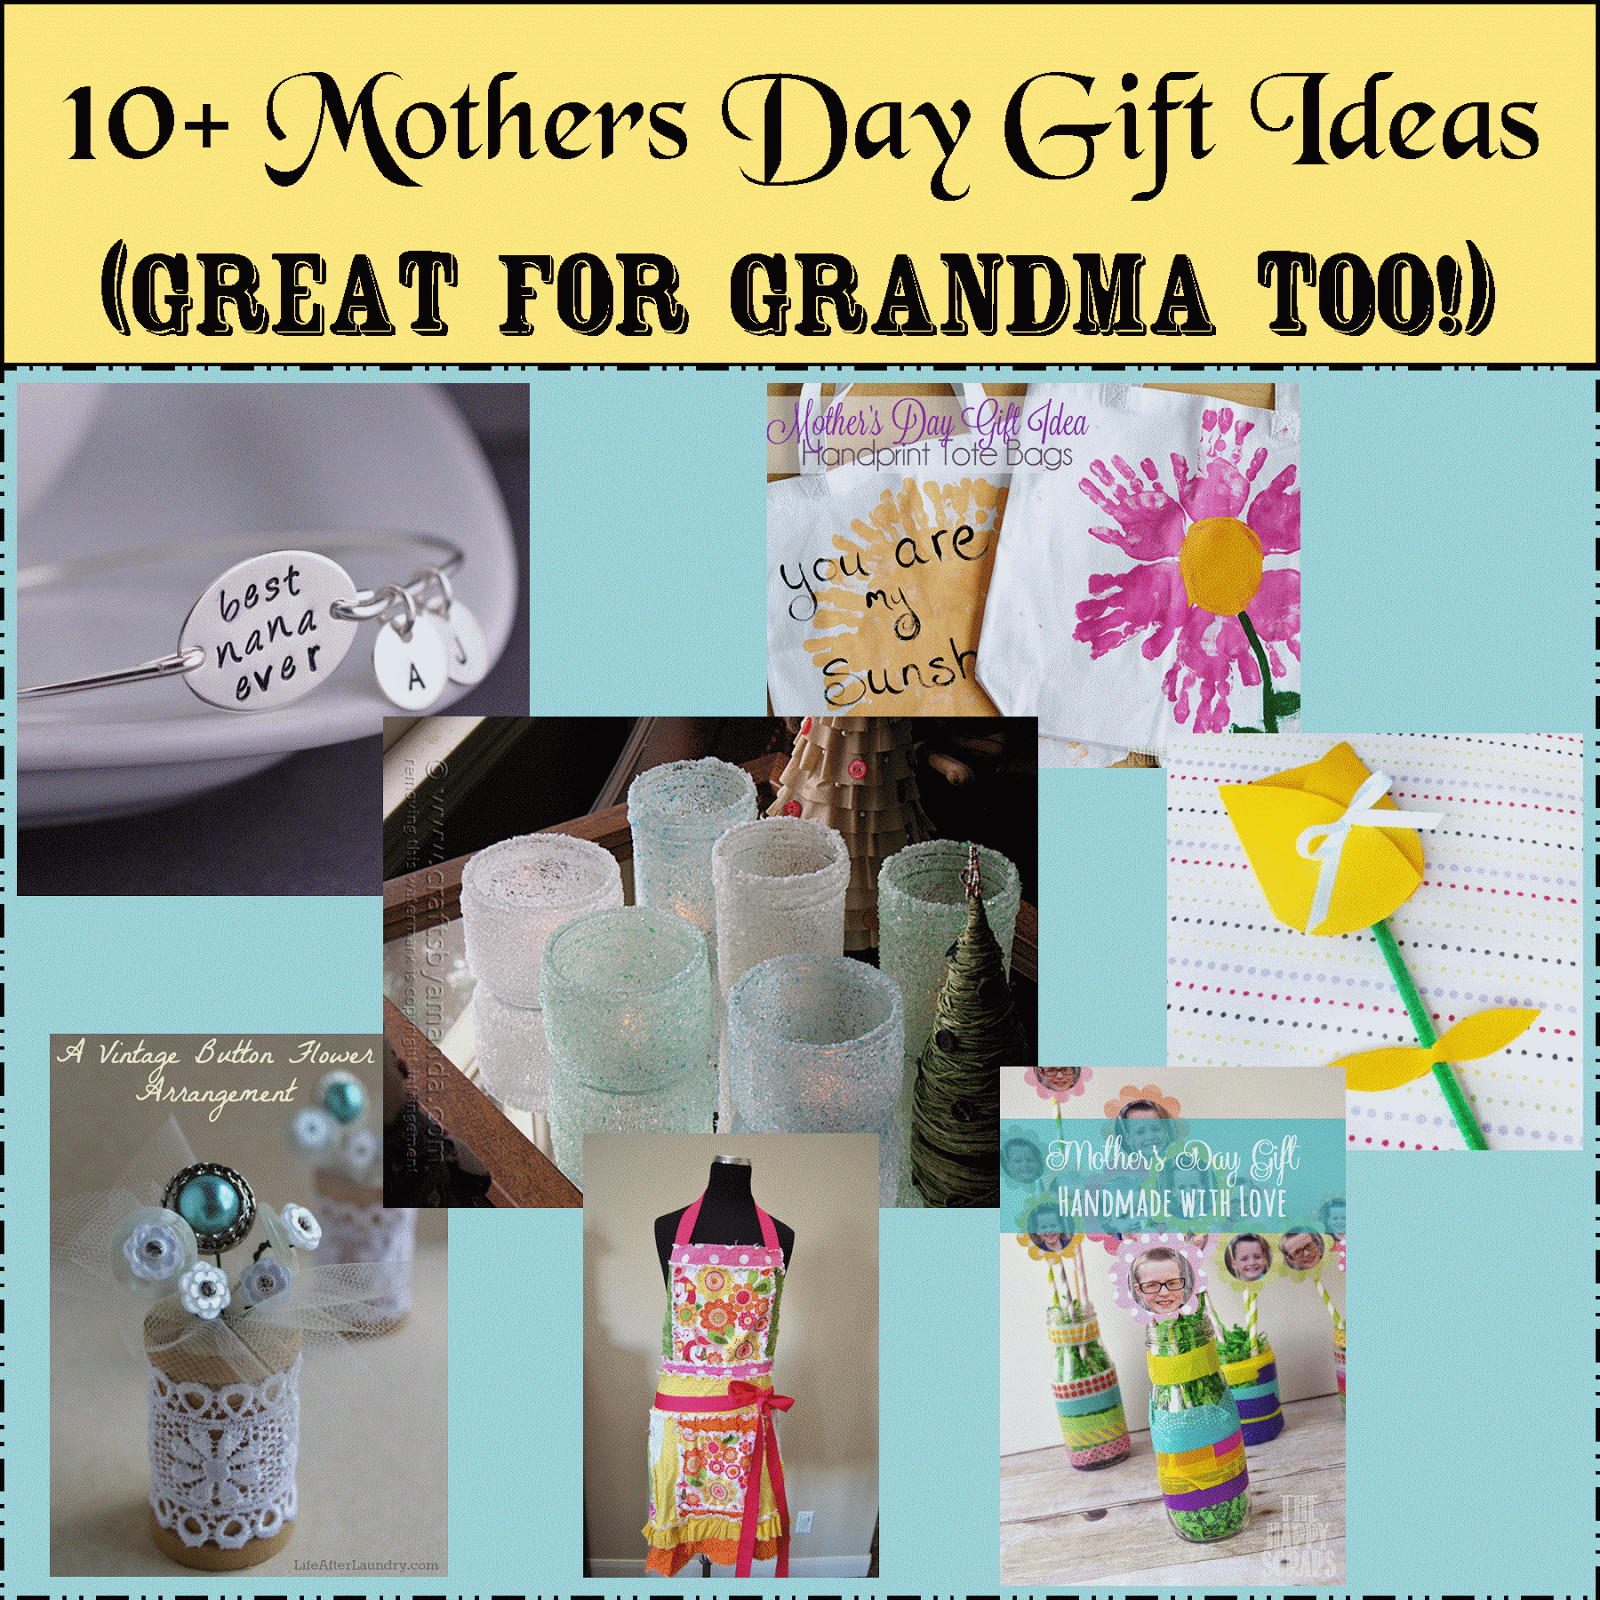 Good Mothers Day Gift Ideas
 Mother Day Gifts Roundup Perfect for Grandma Too